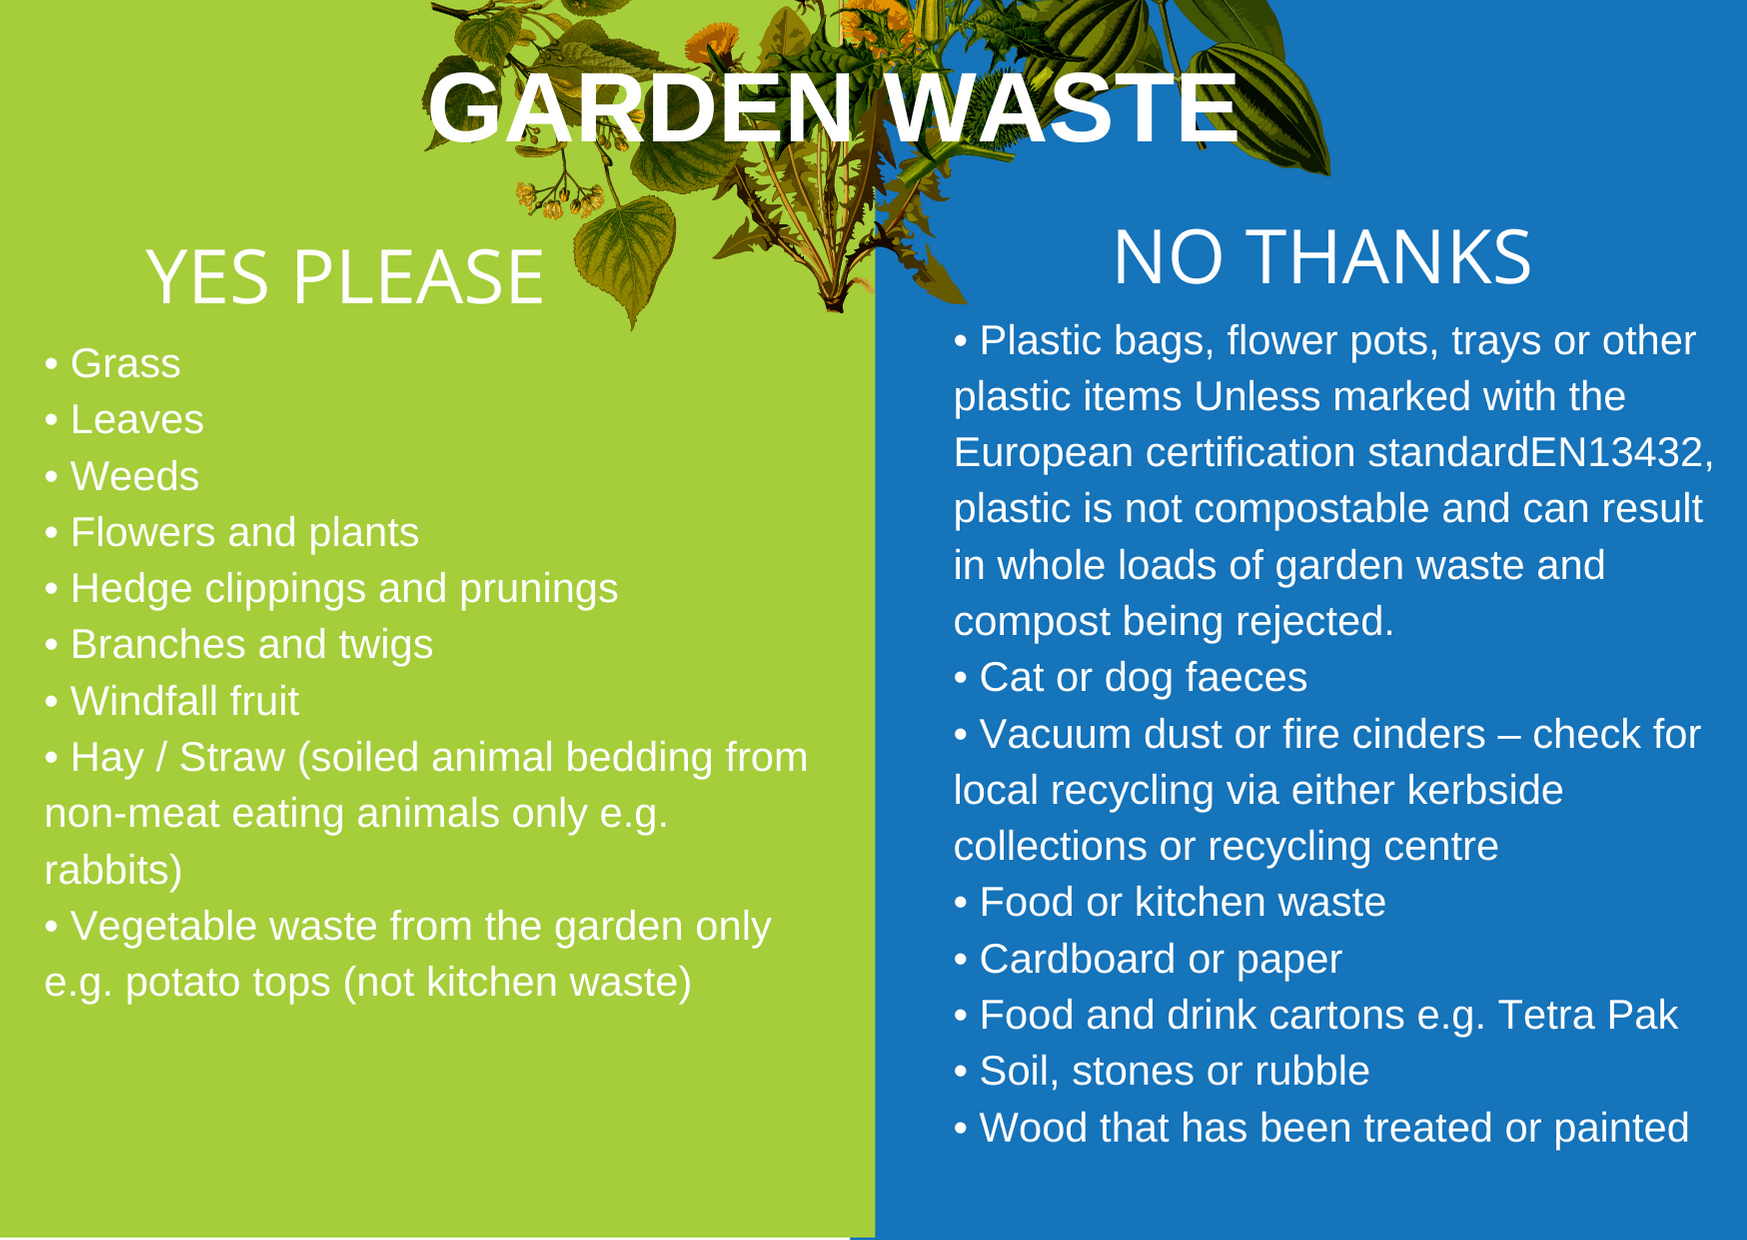 What garden waste can i recycle